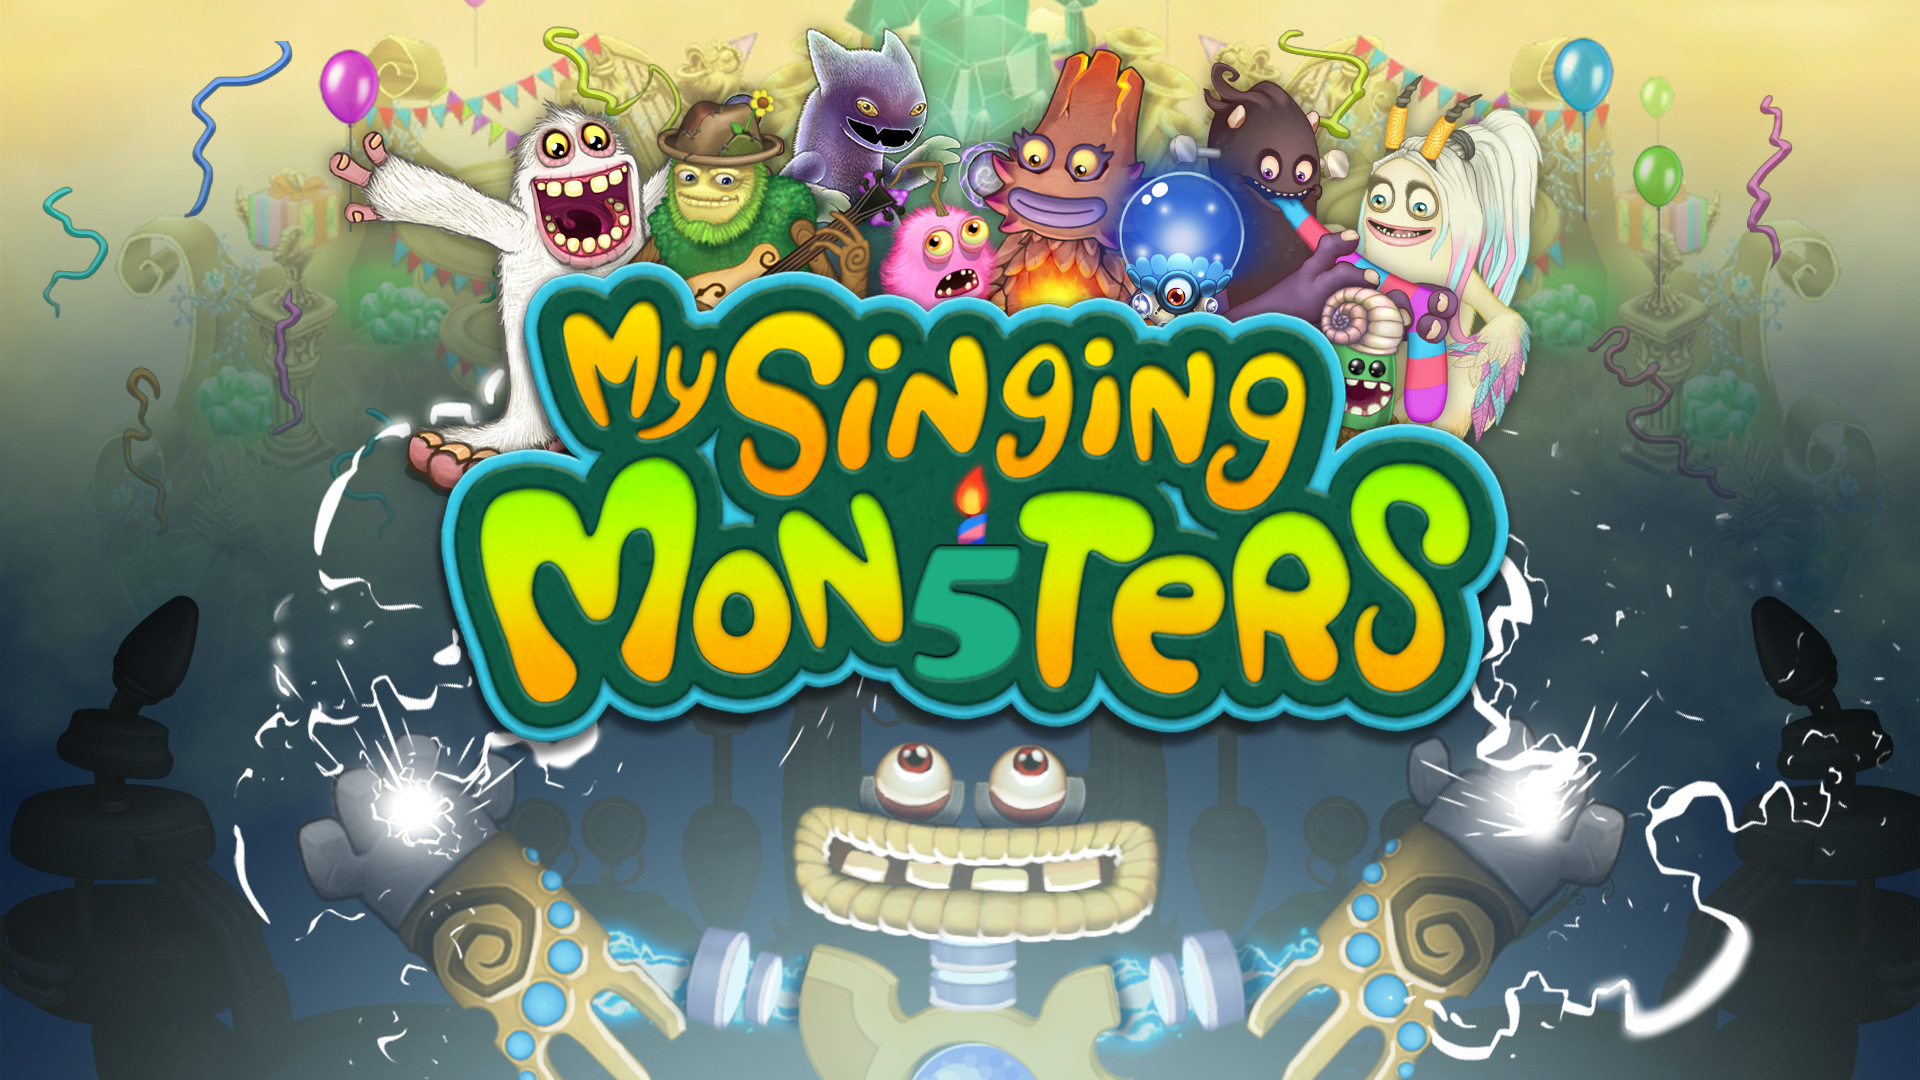 My scary singing monsters